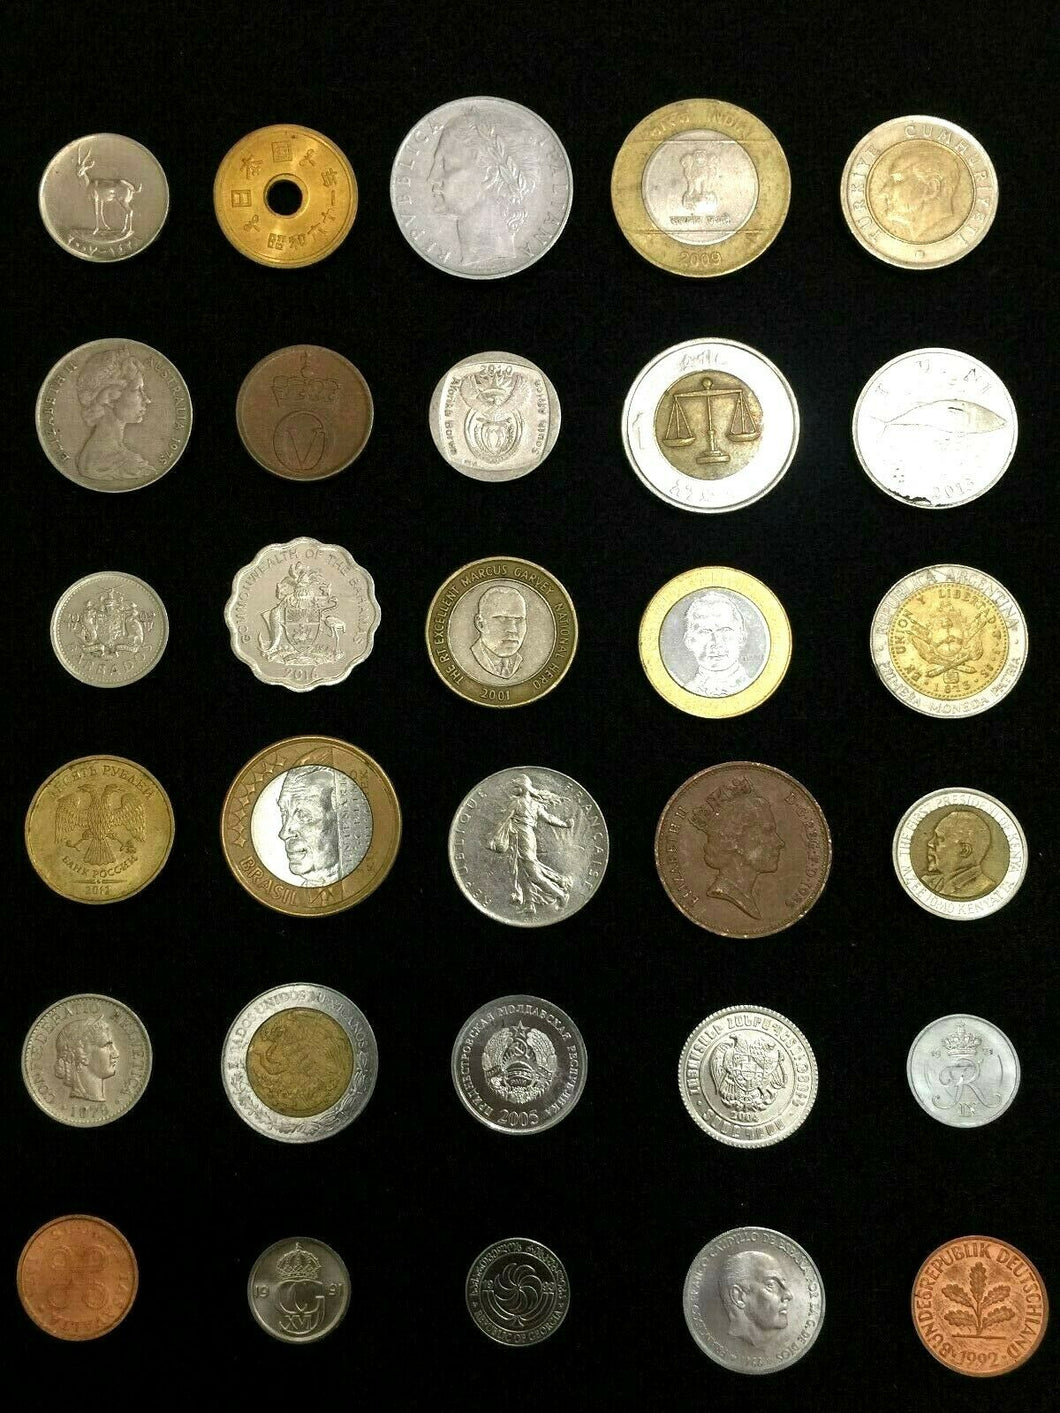 World Coins From 30 Different Countries-Classic Coins Not Found in Cheap Hoards